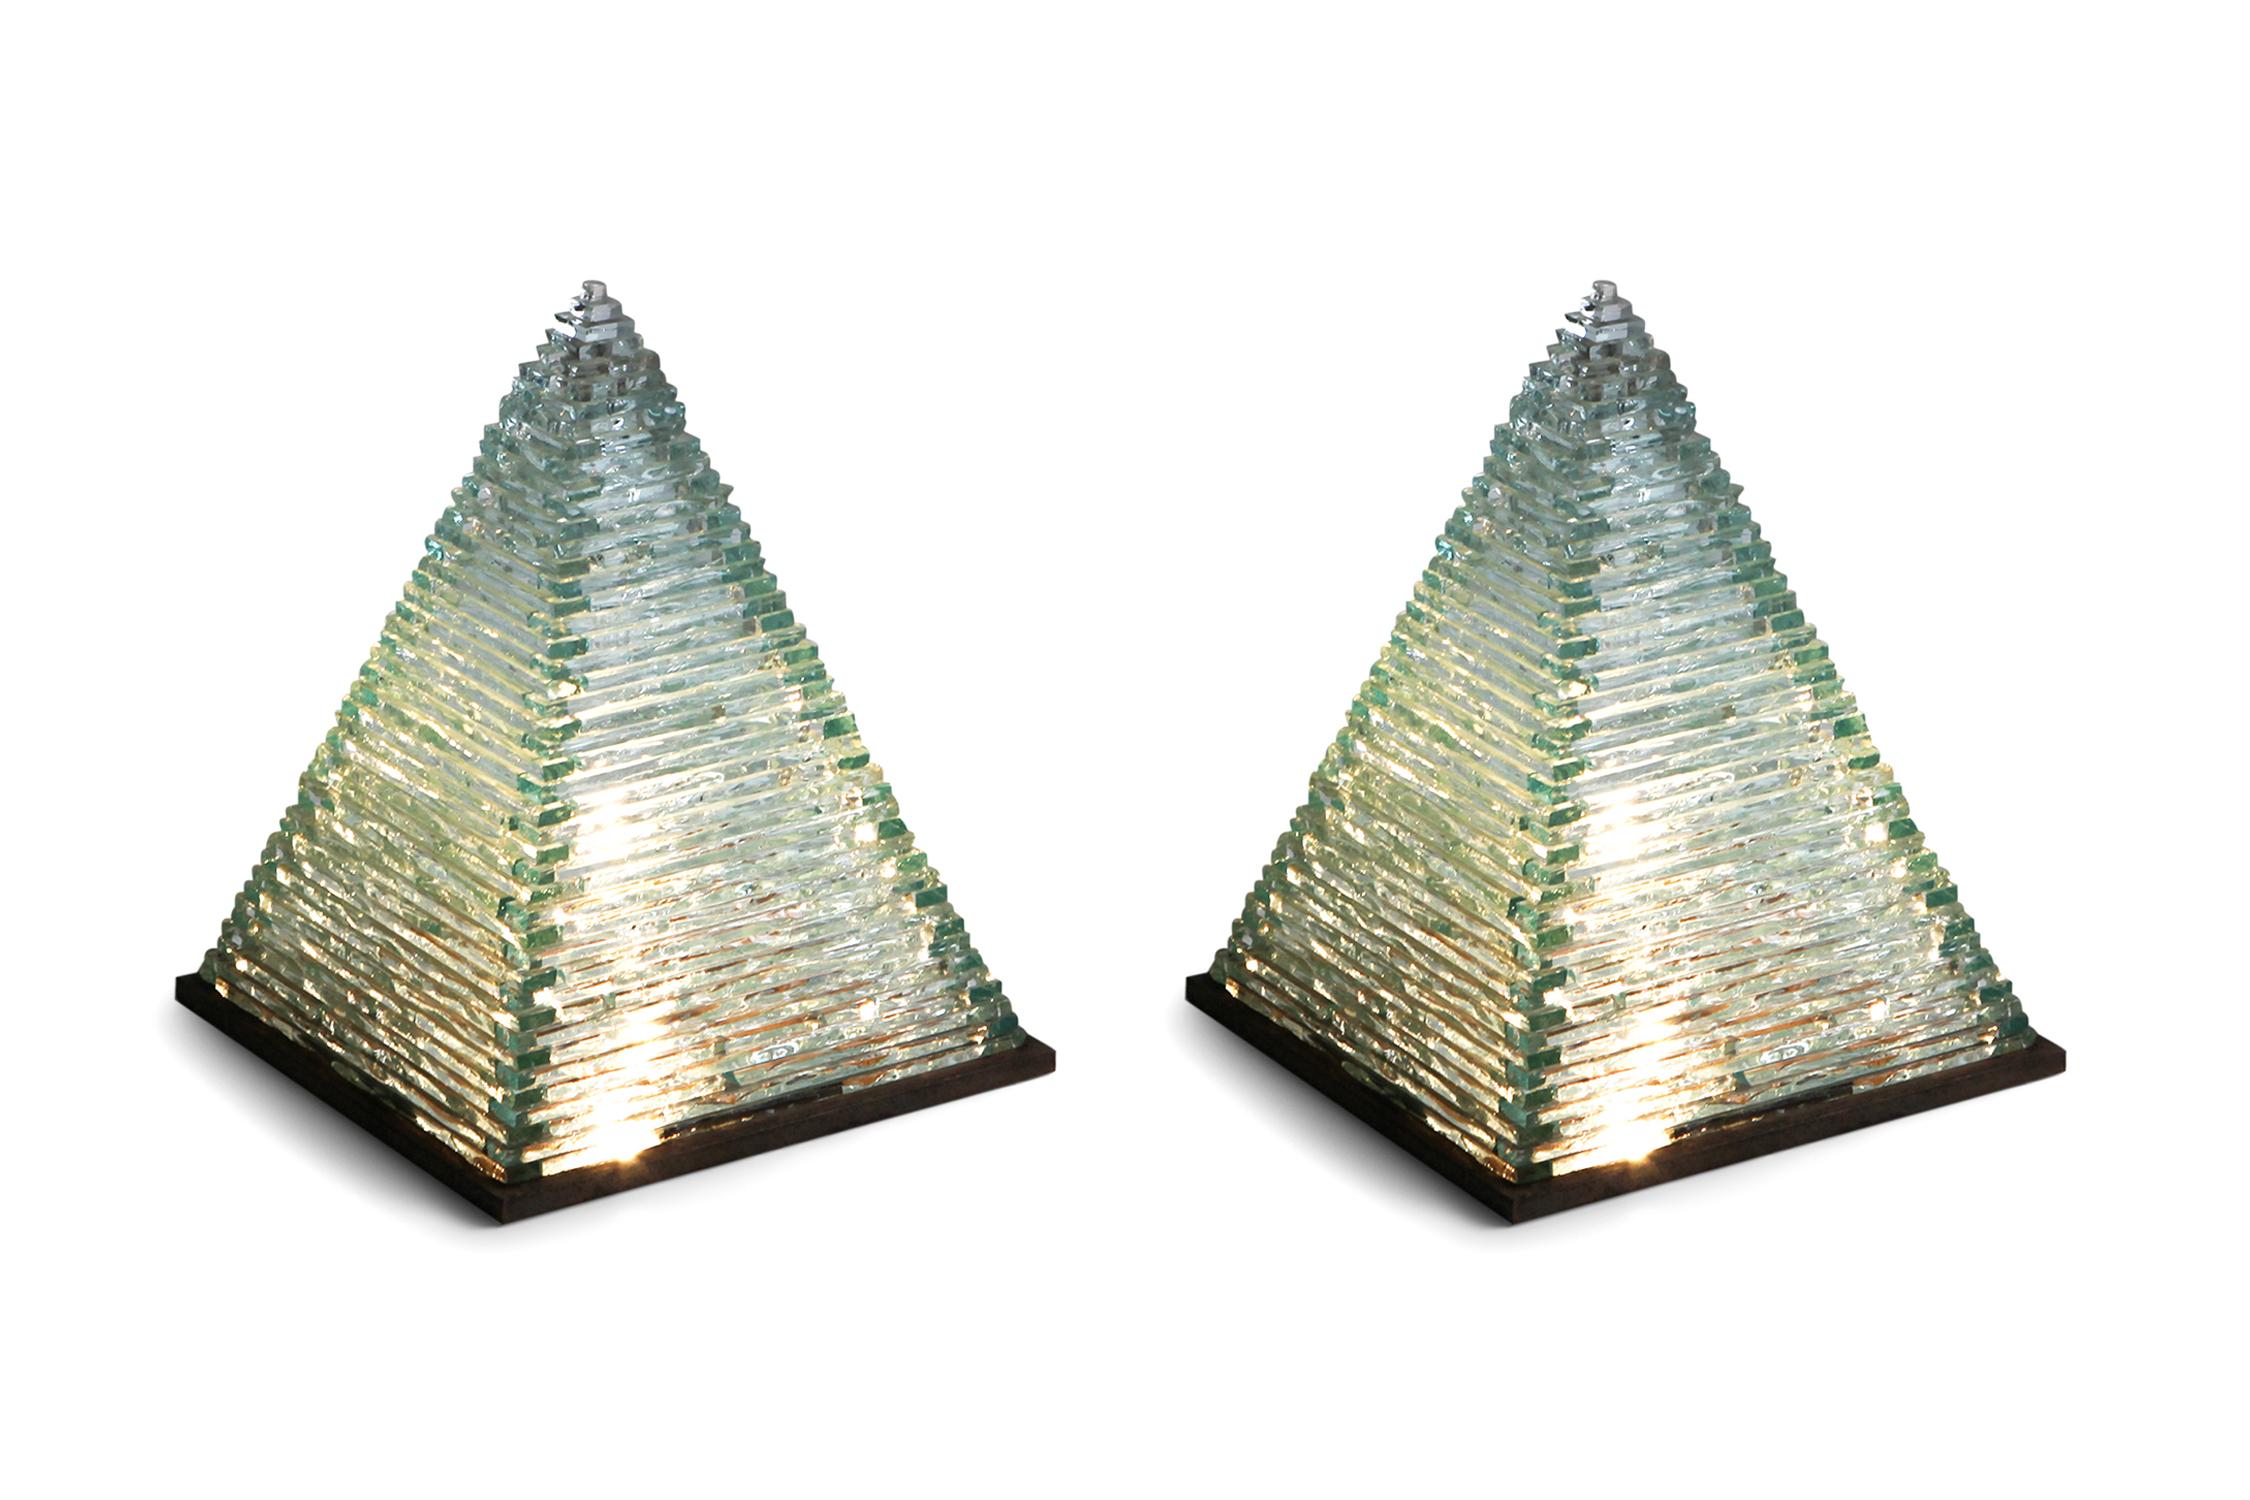 Postmodern Pia Manu pyramid shaped lamps in glass
One-off lighting pieces created by Jules Dewaele in a modern Brutalist style.
The lamps are absolutely stunning pieces of work
multiple layers of glass built up in a pyramid shape, mounted on a